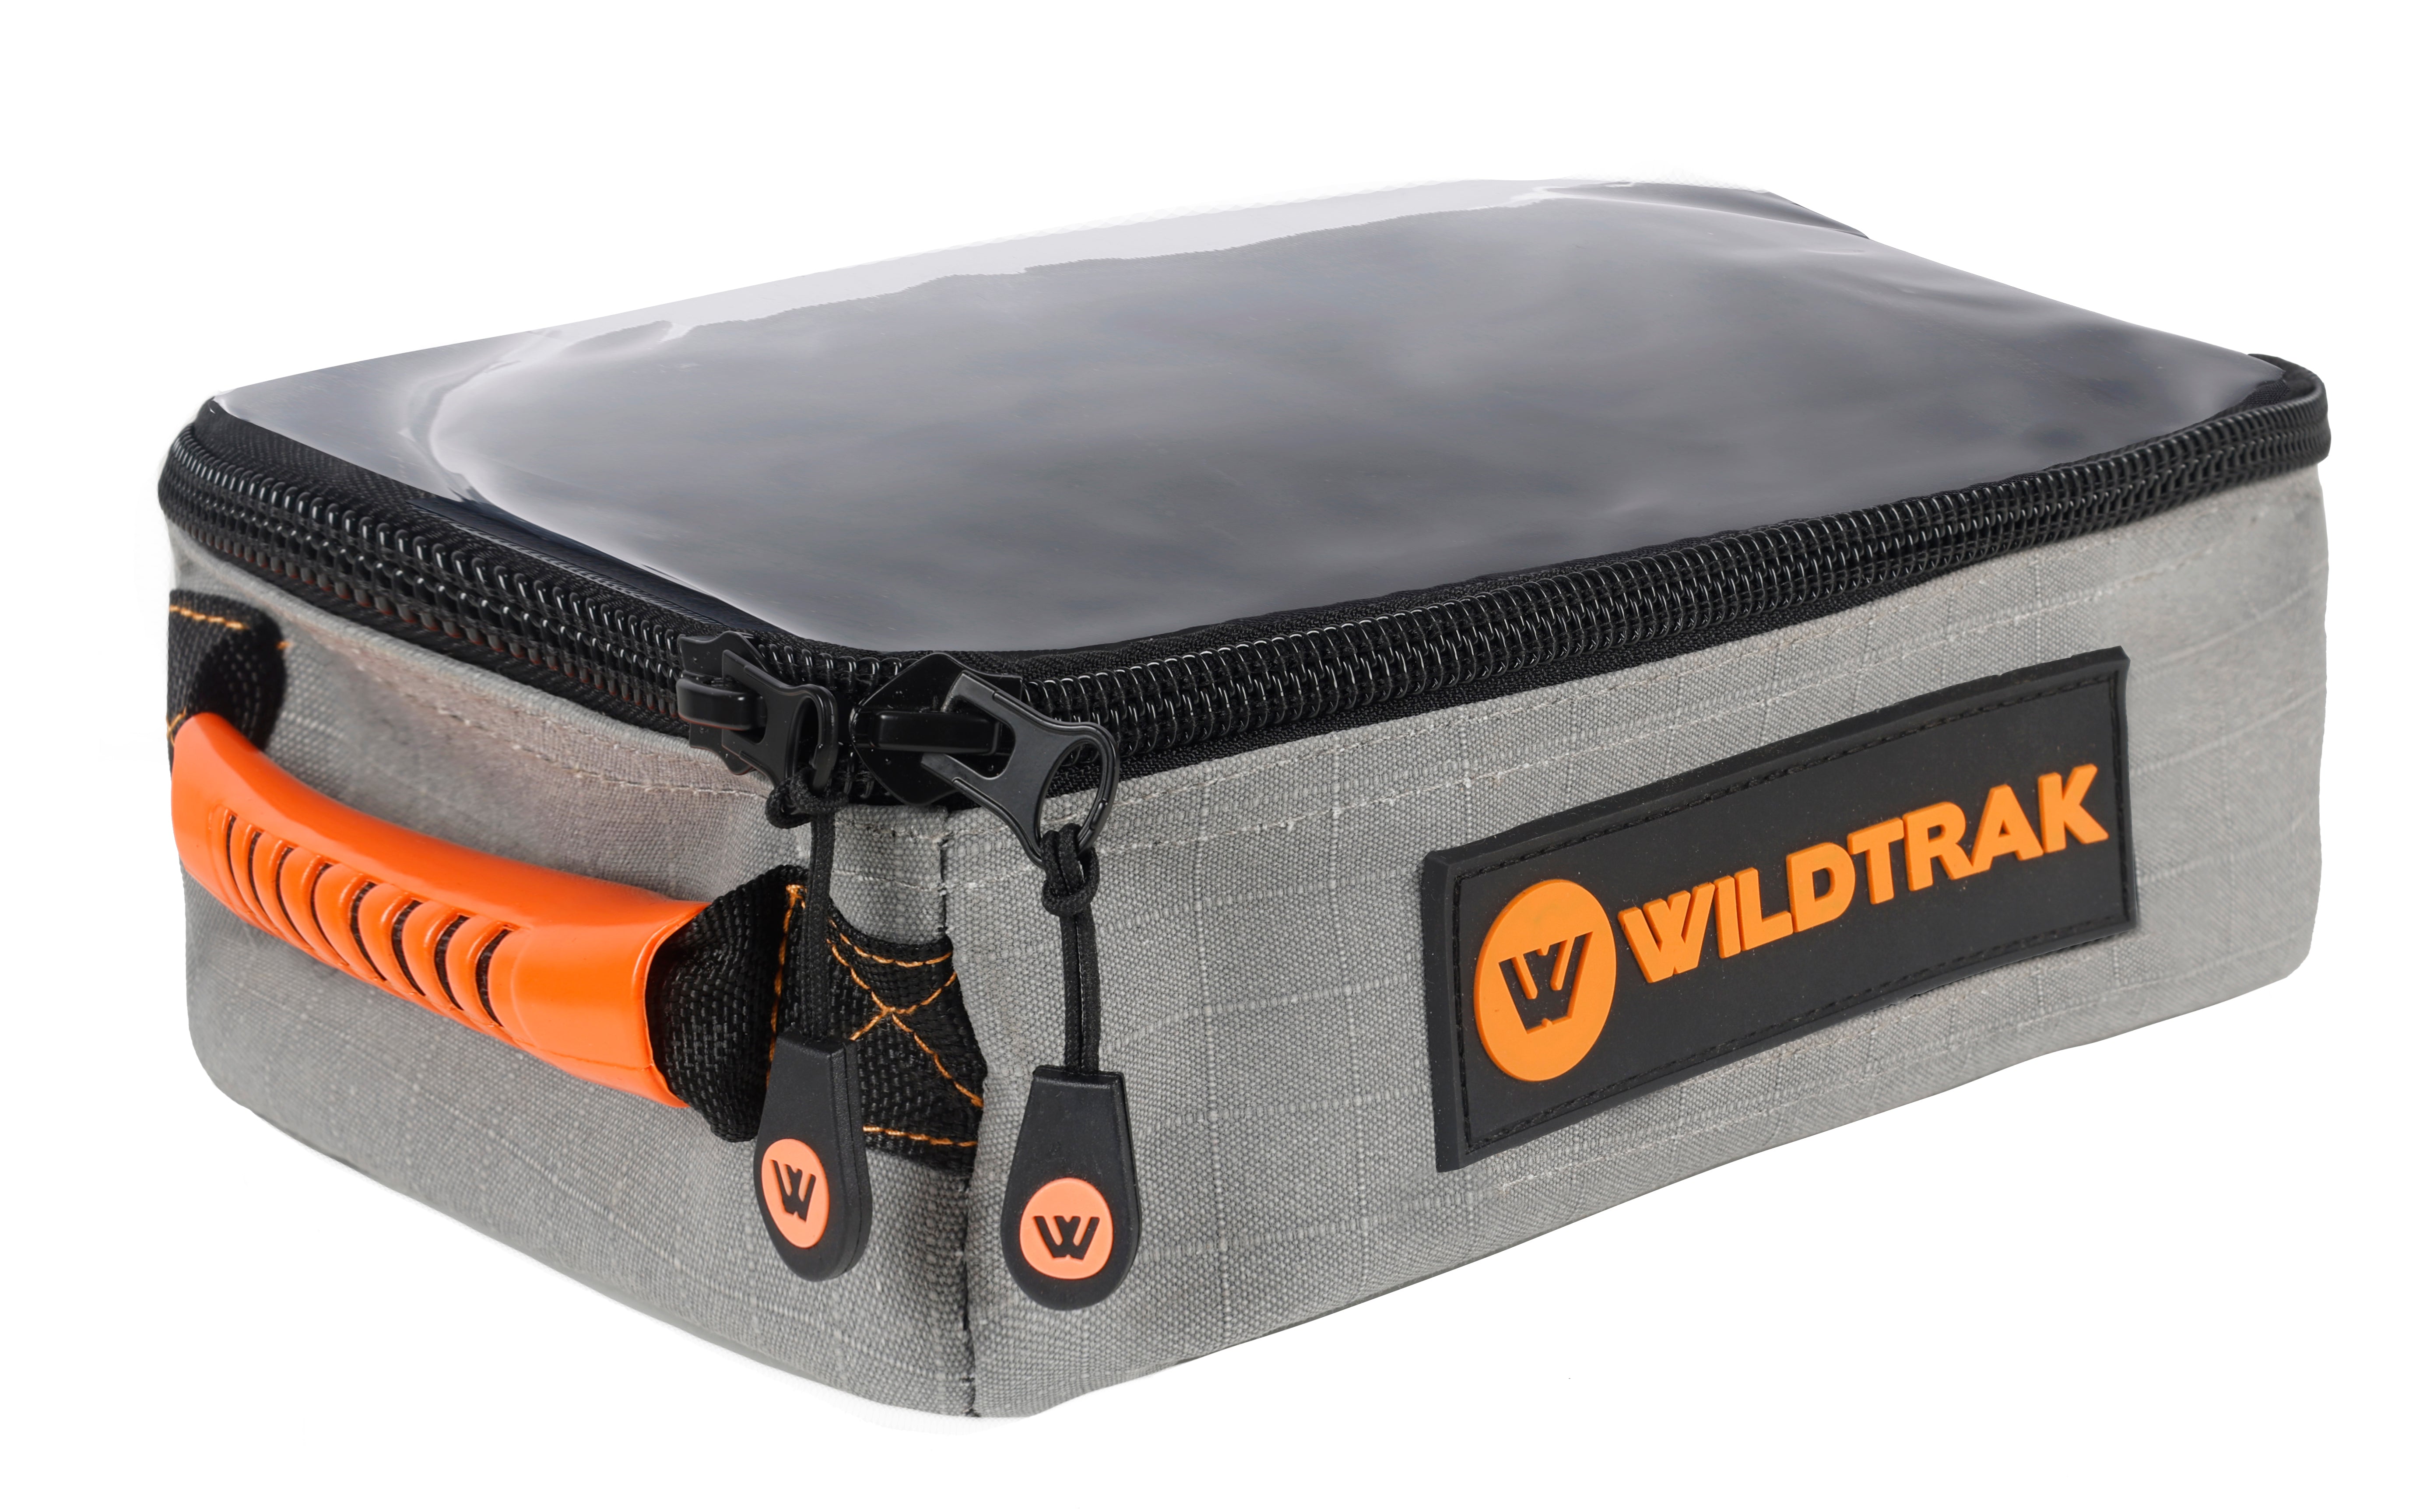 Wildtrak™ Small Clear Top Storage Bag for Camping and 4WD Off-Roading - Heavy-Duty 400GSM Ripstop Canvas